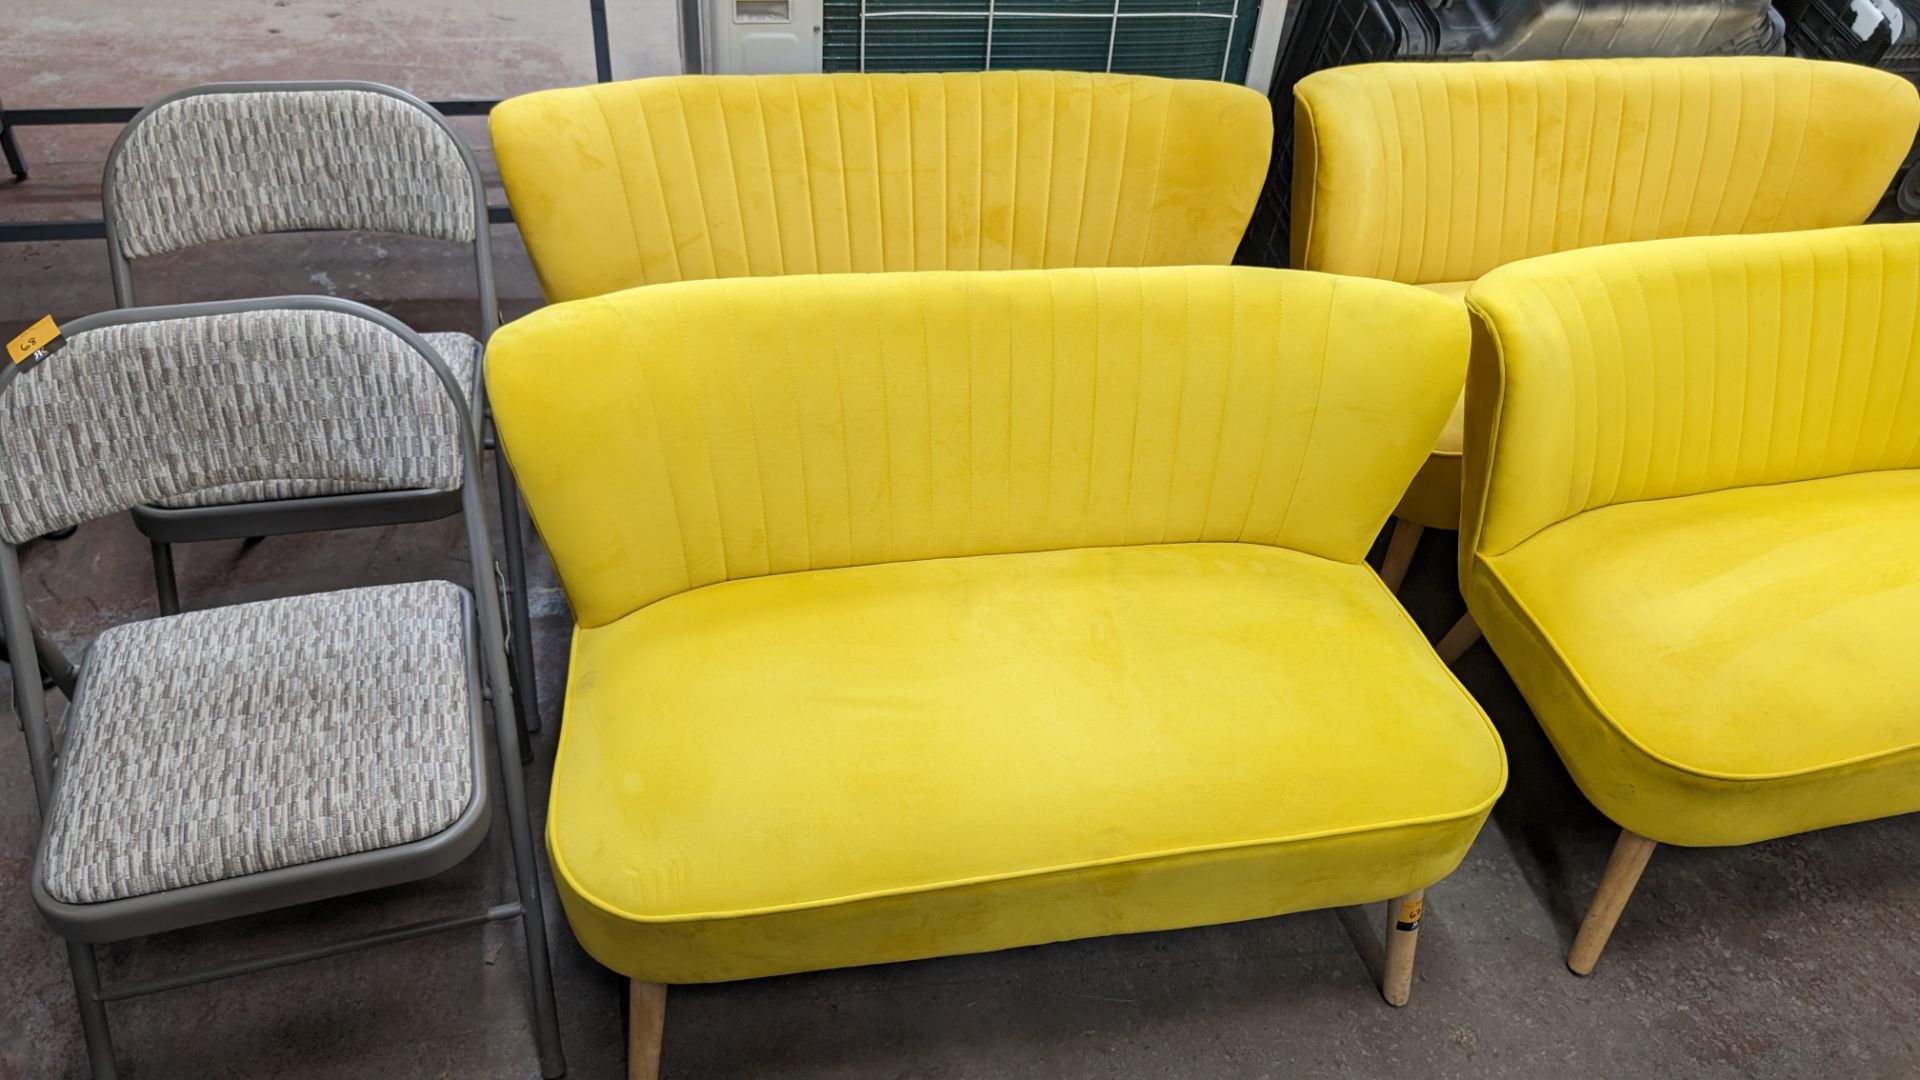 Pair of mustard yellow velour two-person small sofas, each measuring approximately 1120mm wide